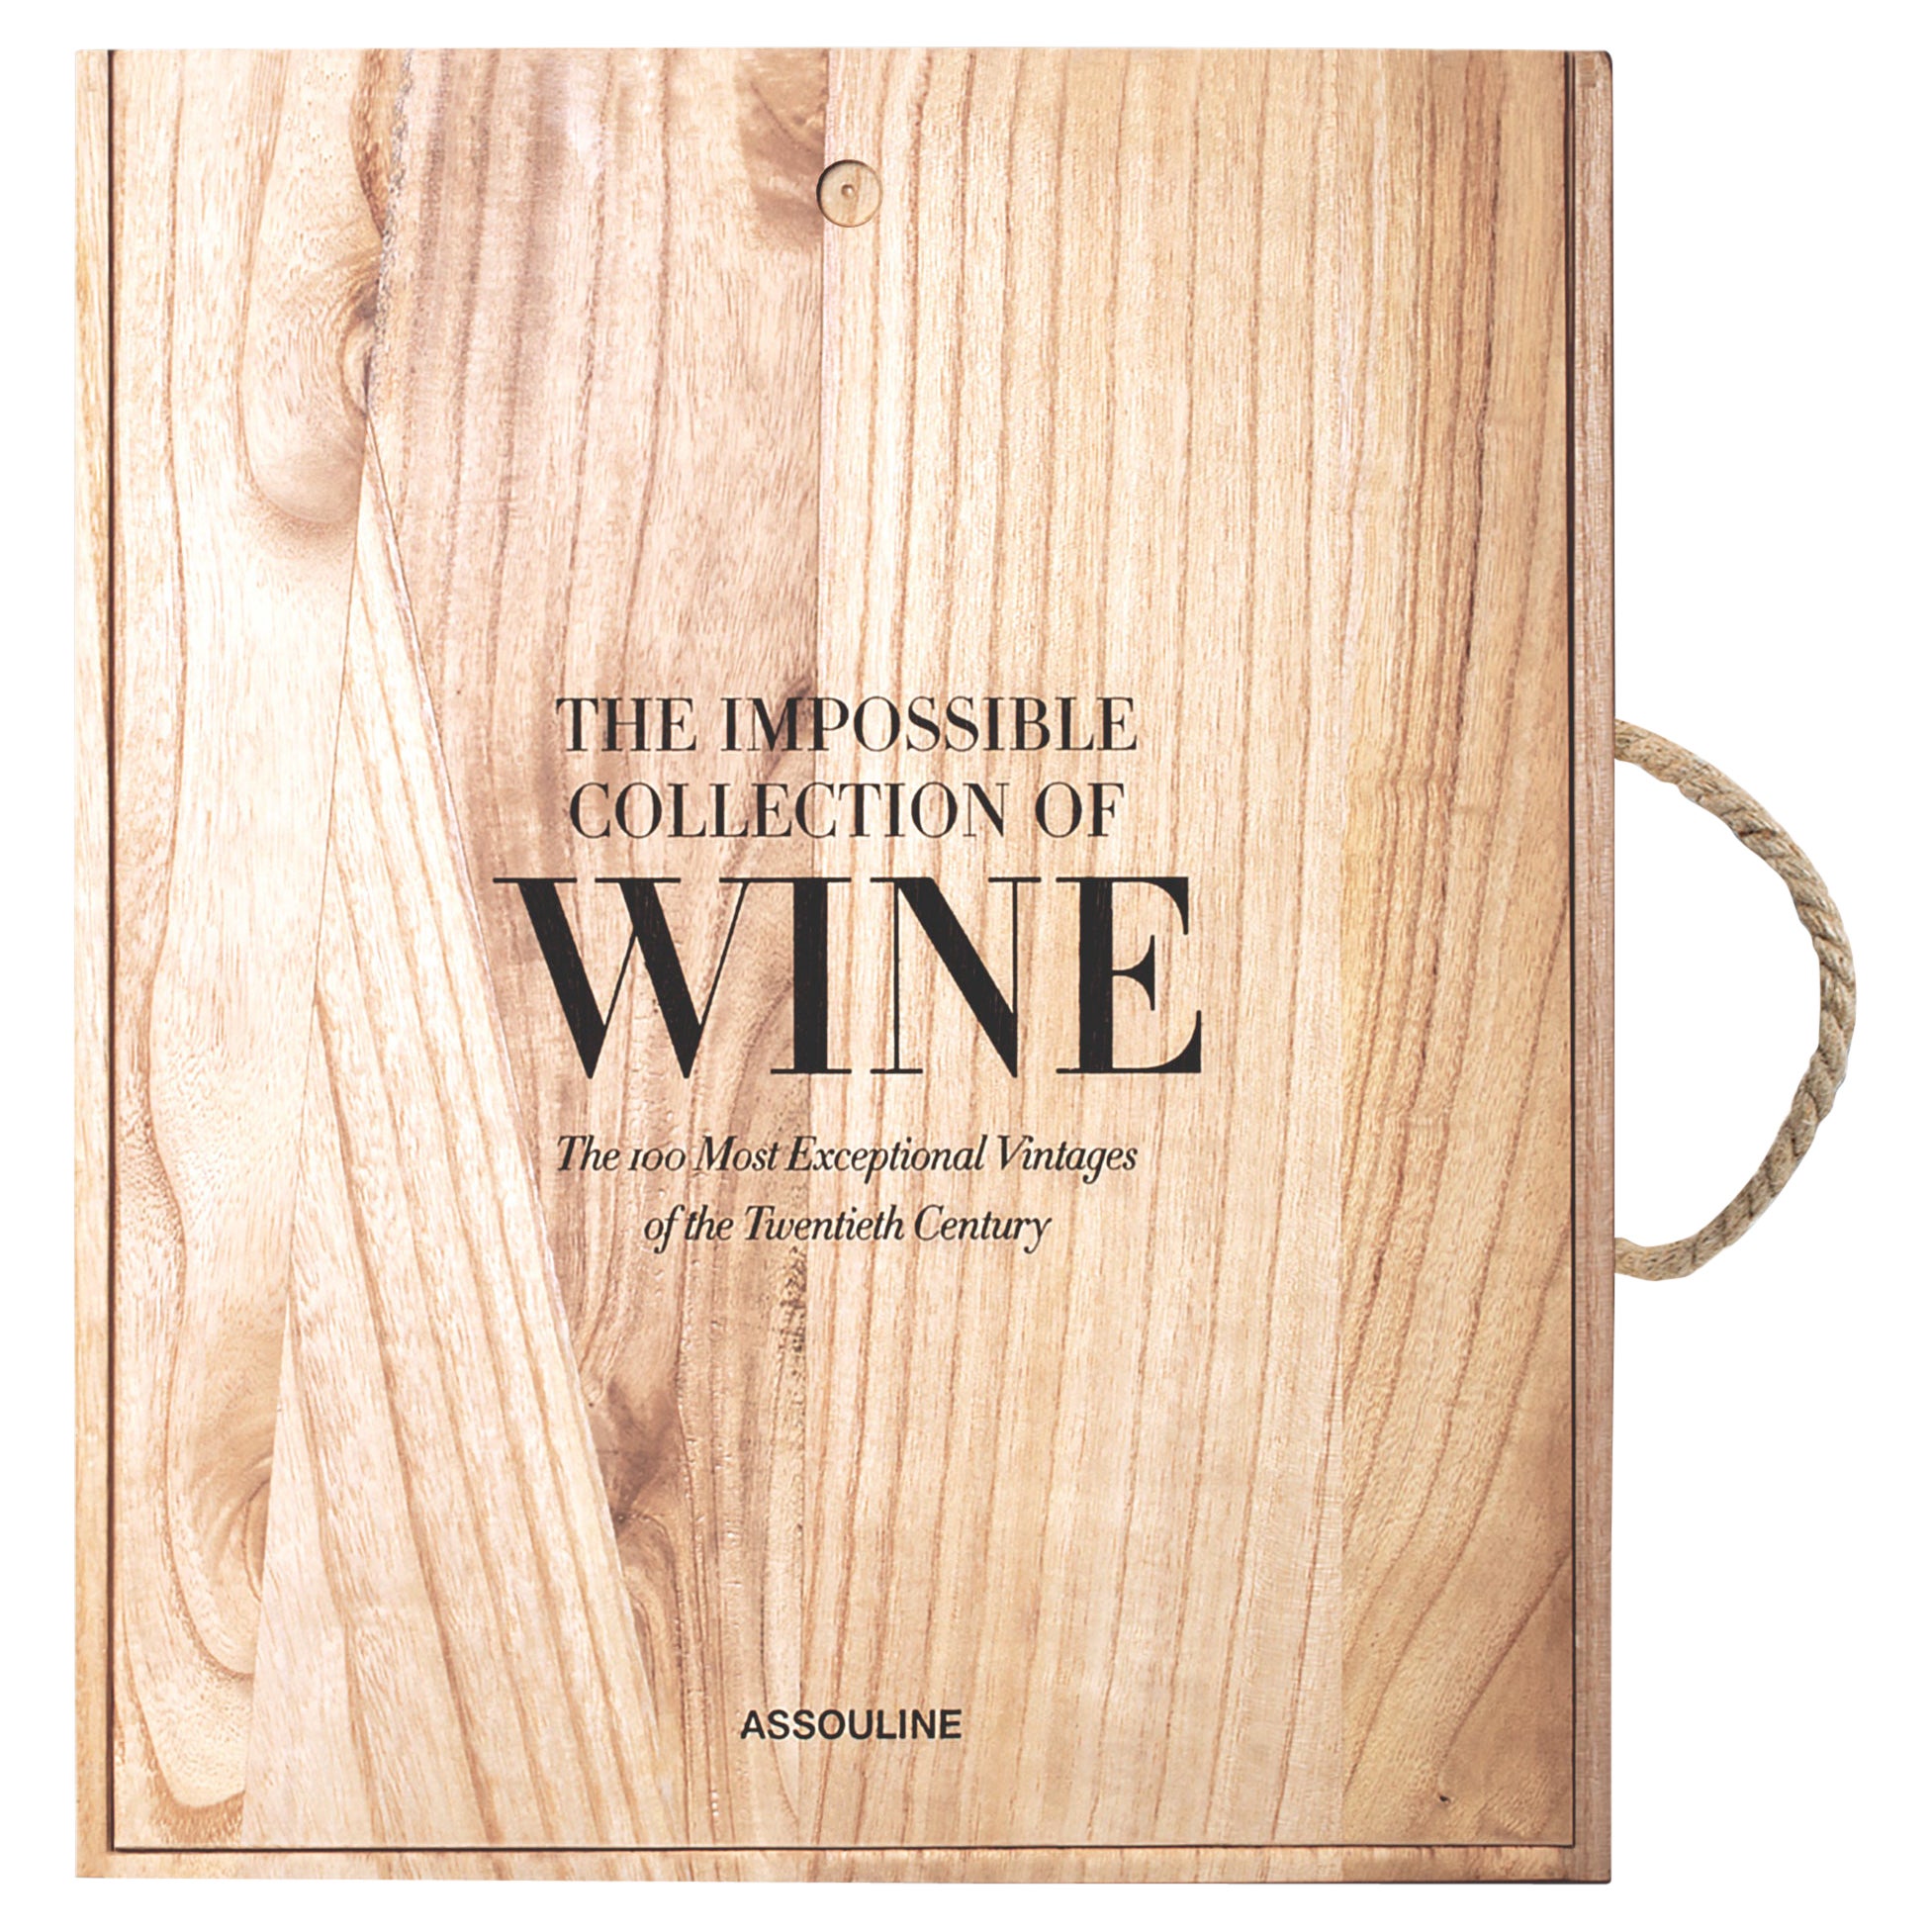 In this stunning addition to the Assouline Ultimate Collection, Enrico Bernardo, the world’s best sommelier, imagines the perfect cellar filled with the most exceptional wines of the twentieth century: The Impossible Collection of Wine. Weighing the